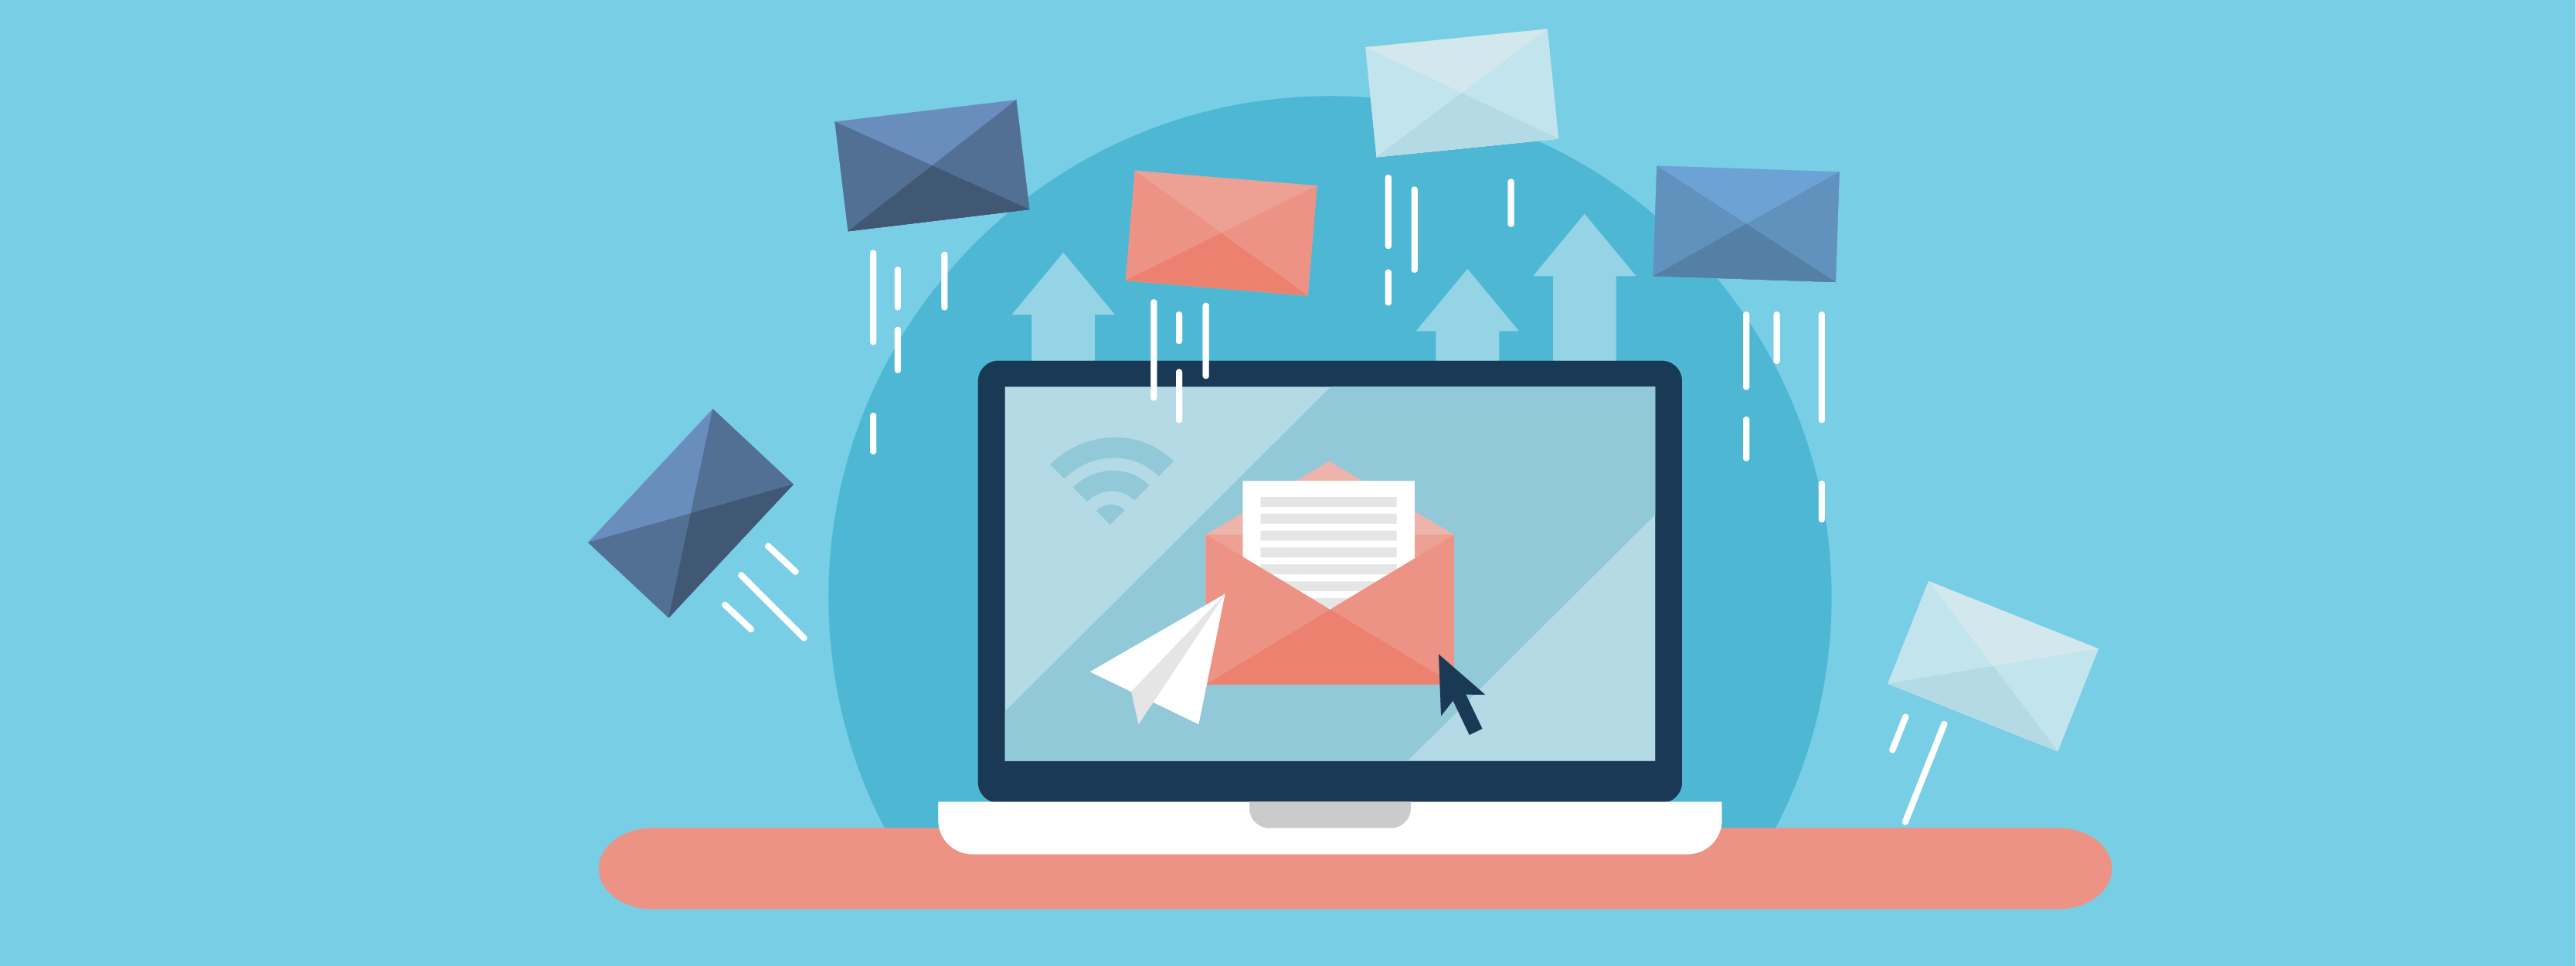 How to Build SaaS Customer Loyalty with Email Marketing